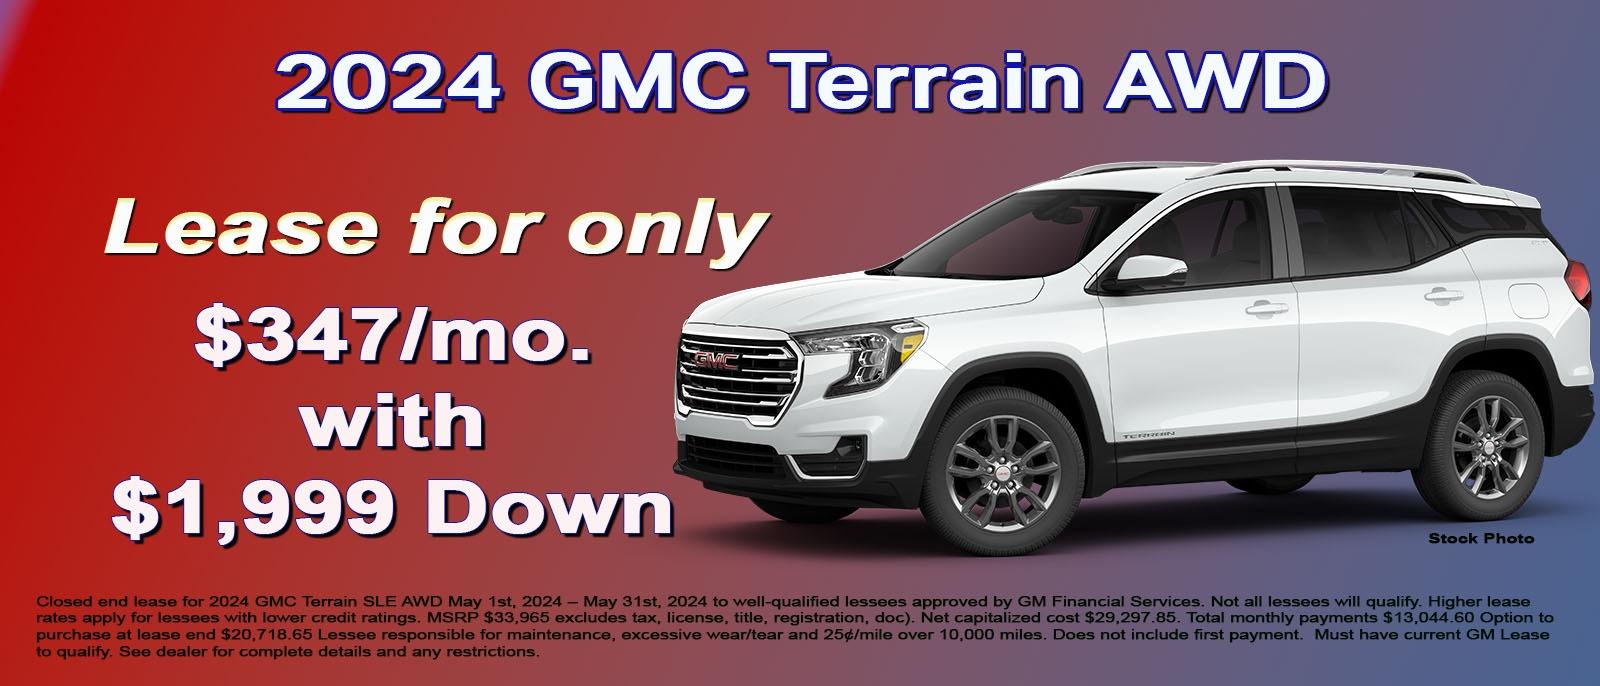 Lease your GMC Terrain for only $347